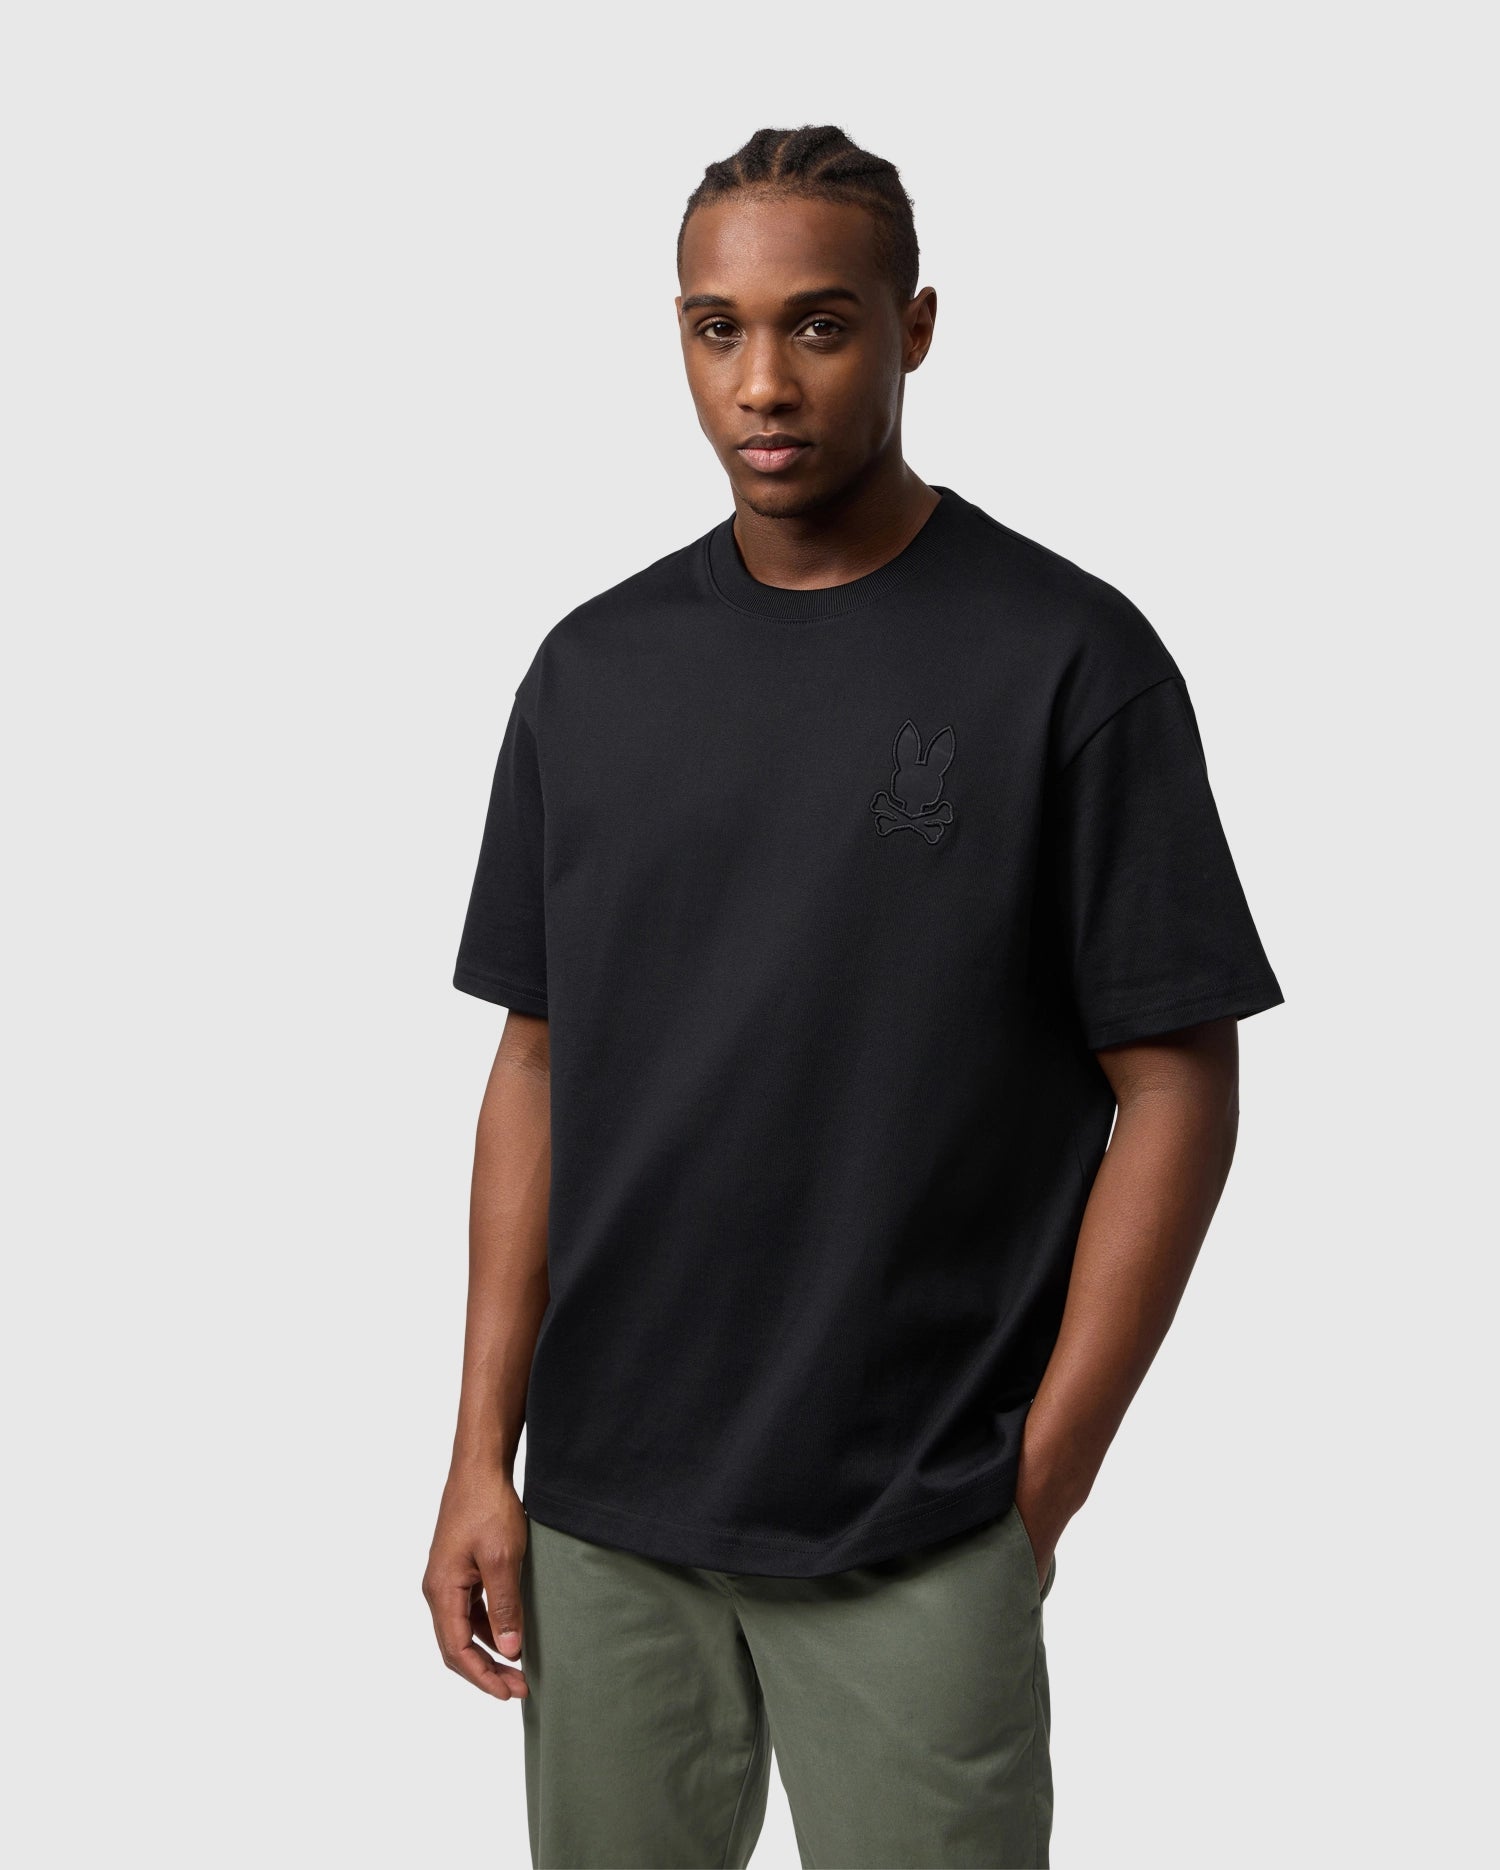 A man wearing a Psycho Bunny MENS DANBY OVERSIZED TEE - B6U359B2TS with a small embroidered logo and olive green pants stands against a light gray background, looking at the camera with a neutral expression.